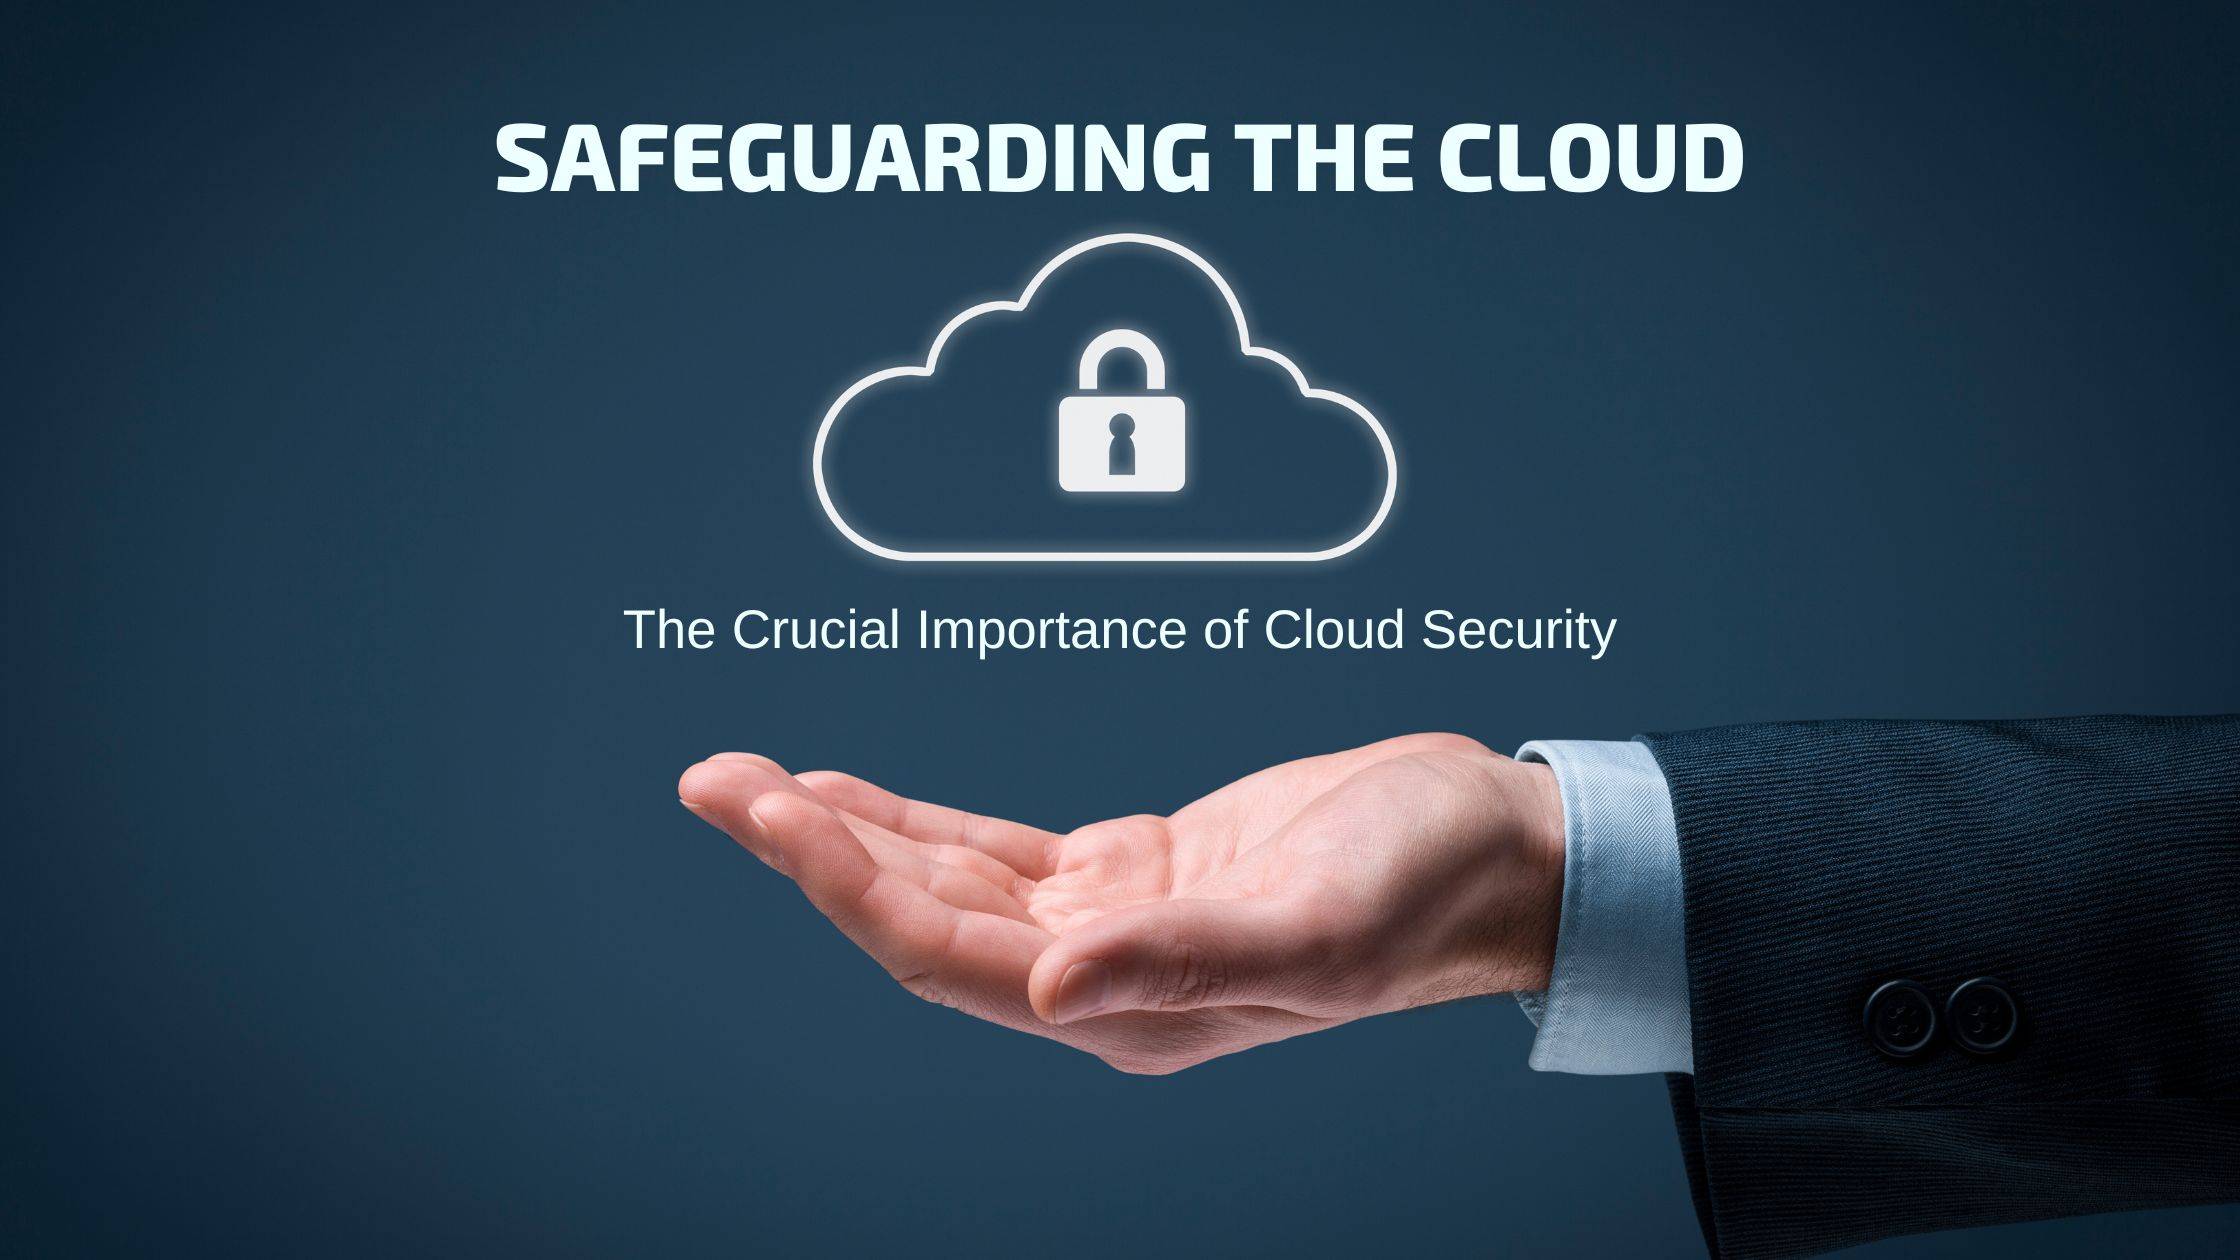 Safeguarding the Cloud: The Crucial Importance of Cloud Security